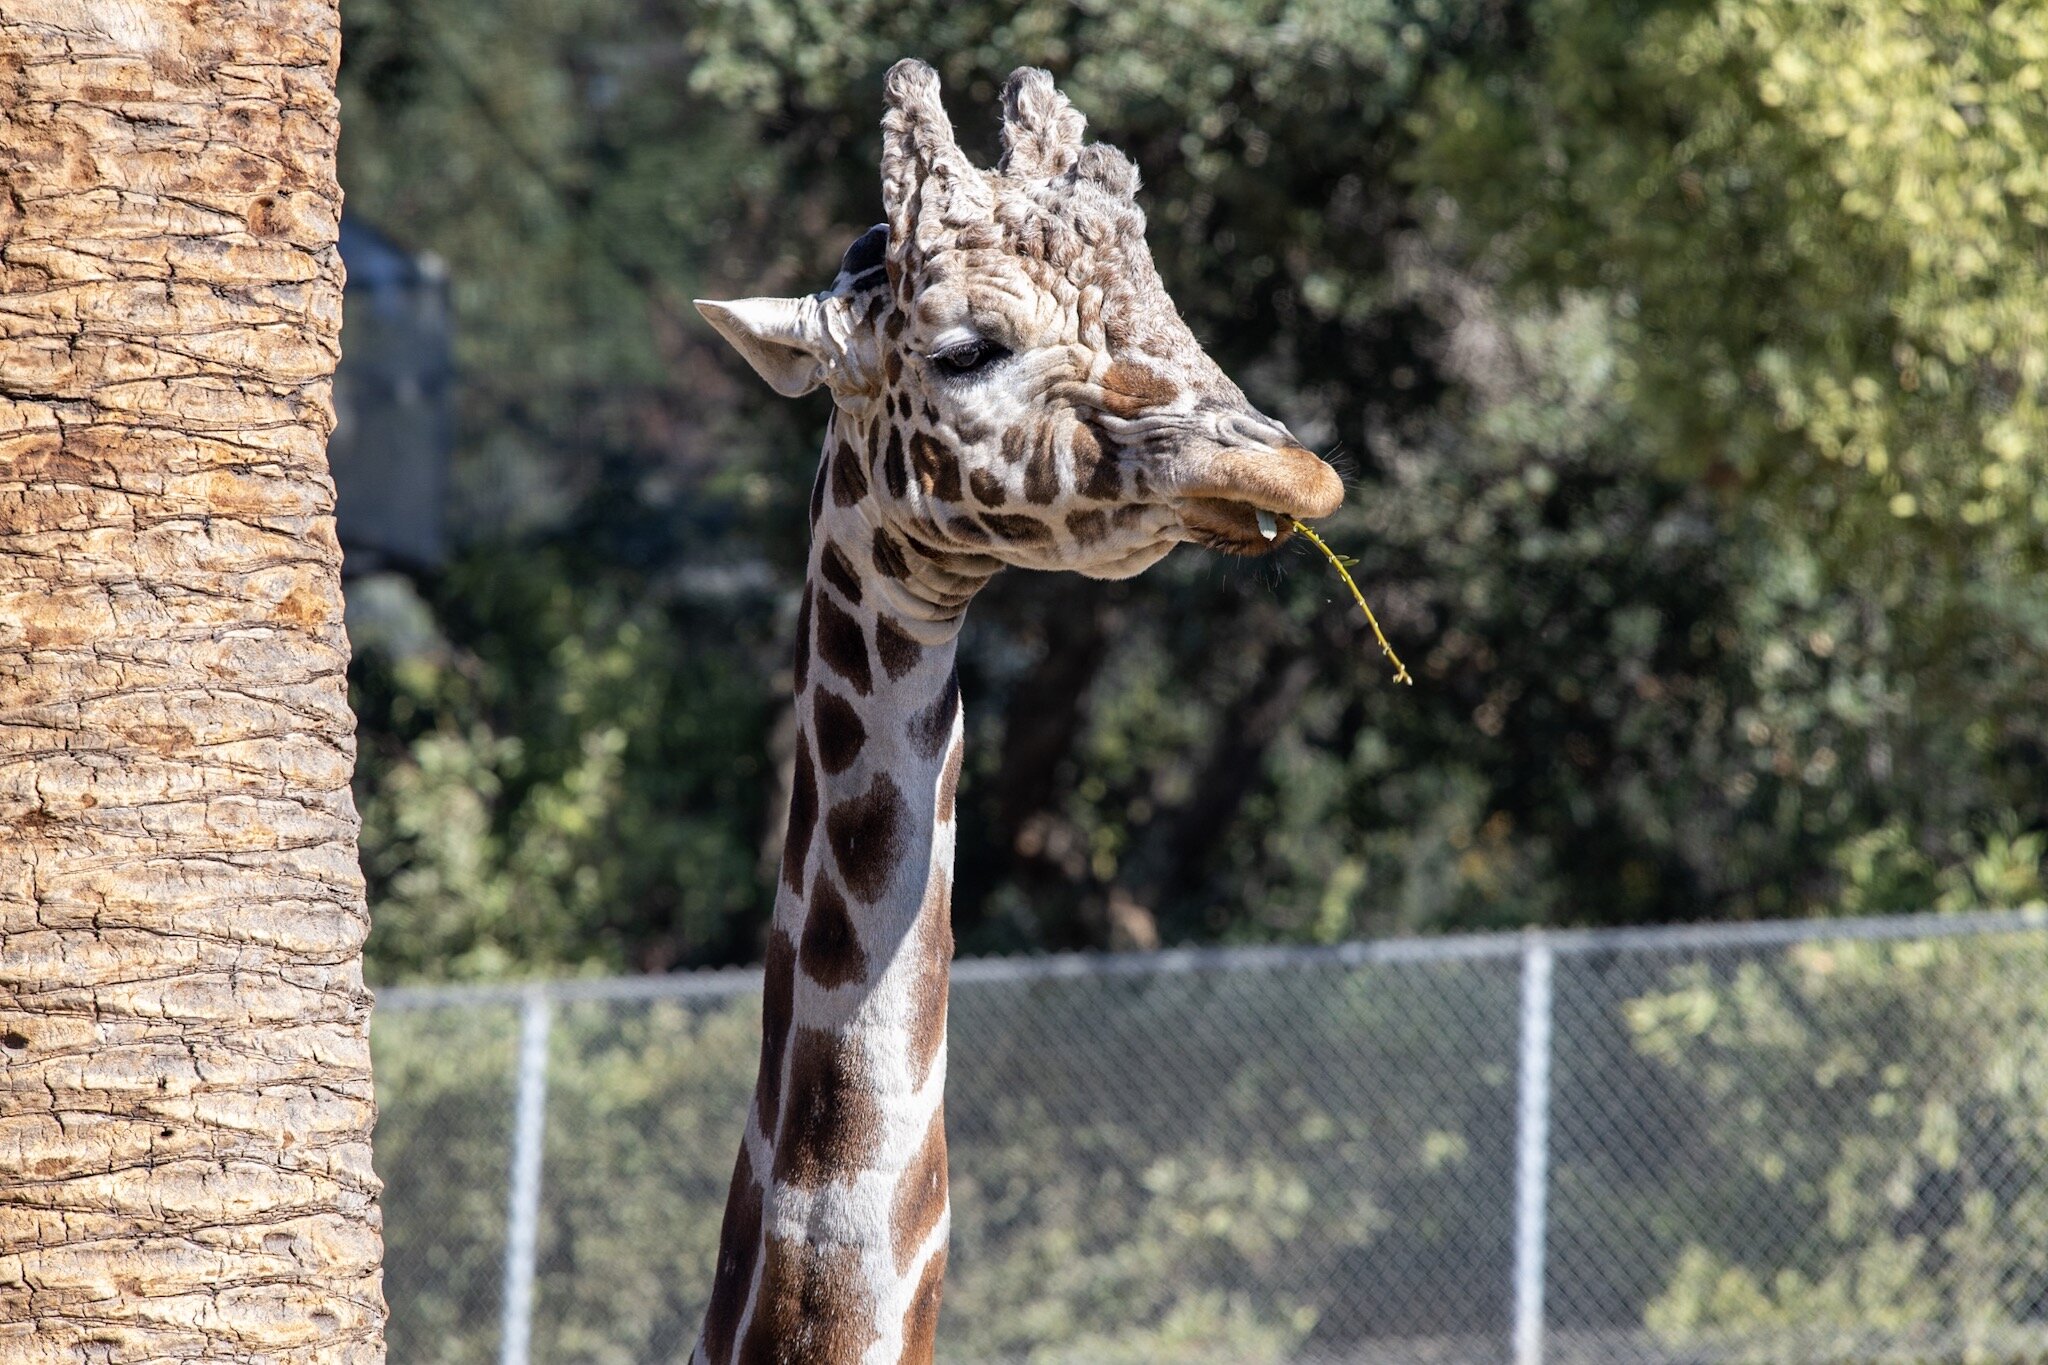  One of a couple giraffes at the zoo. He was just munching on breakfast looking at us looking at him. 